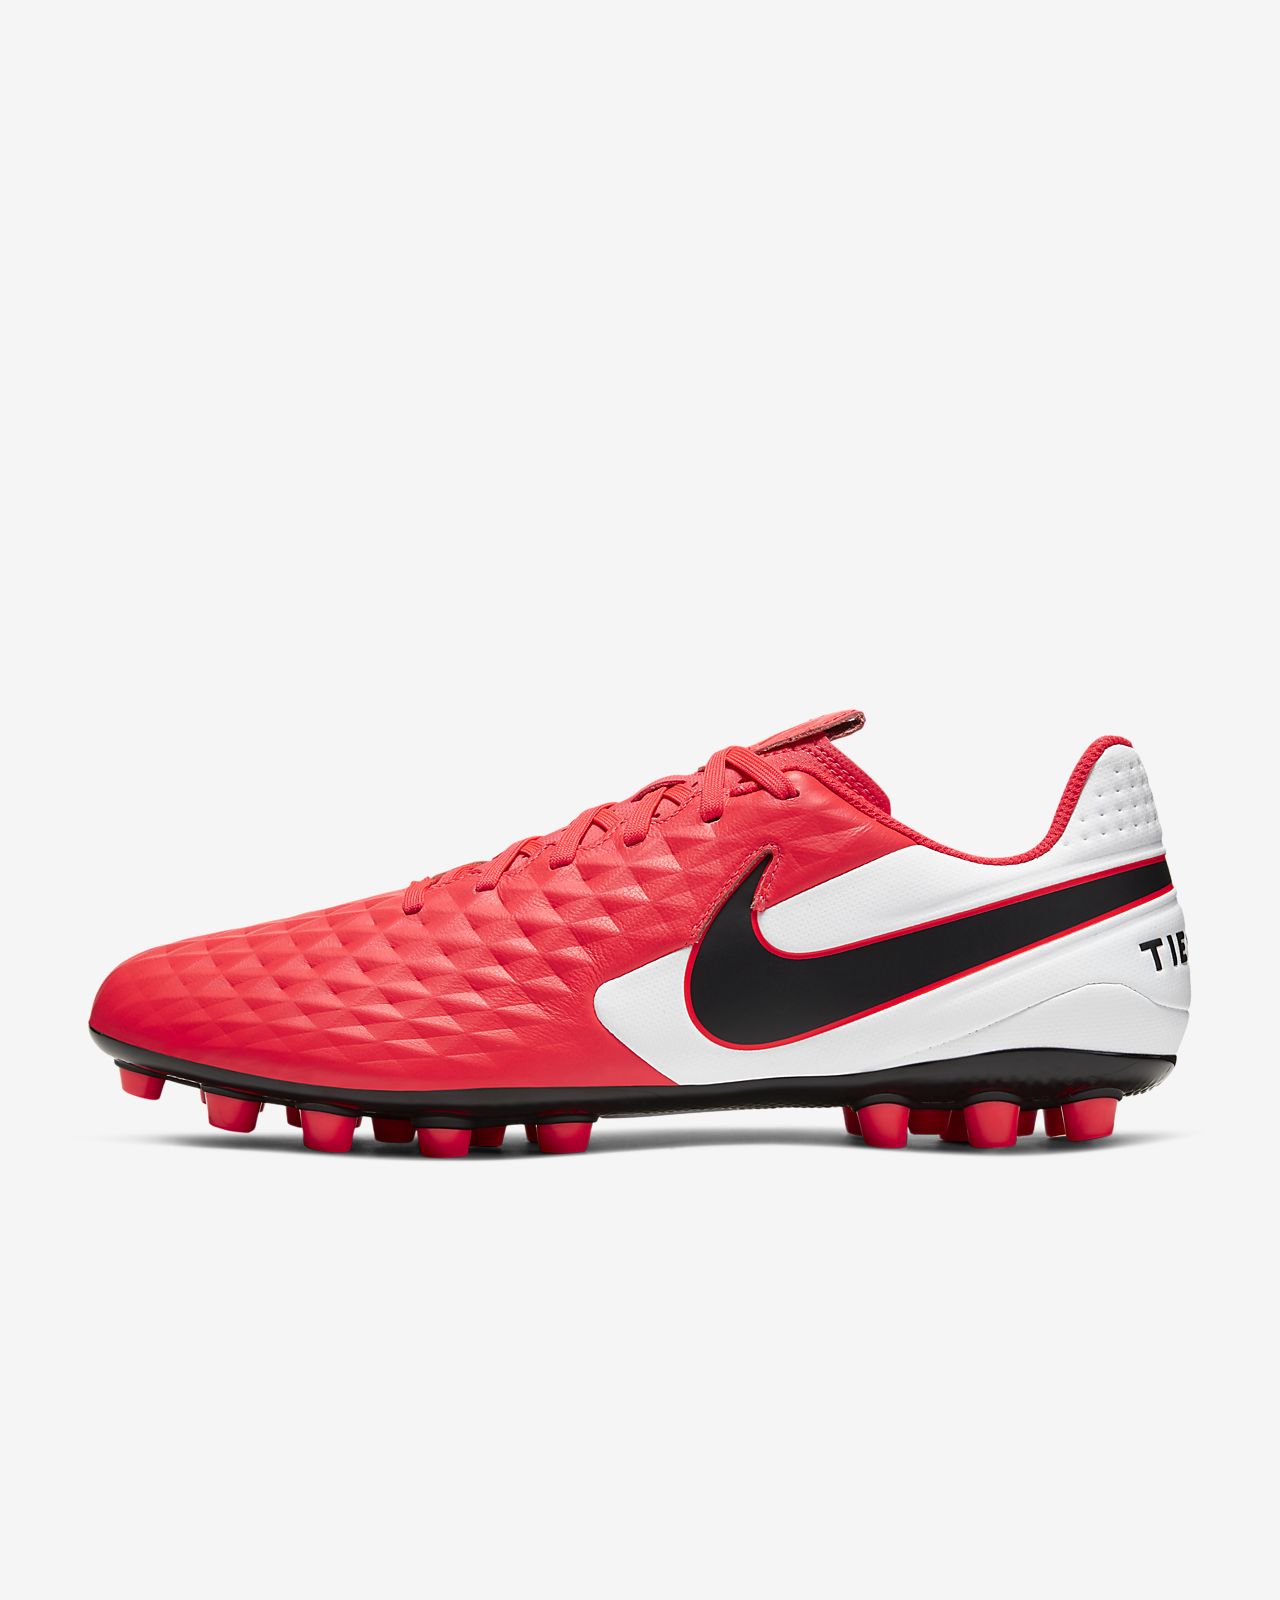 HOW THEY FIT Nike Tiempo Legend 8 SGPRO YouTube